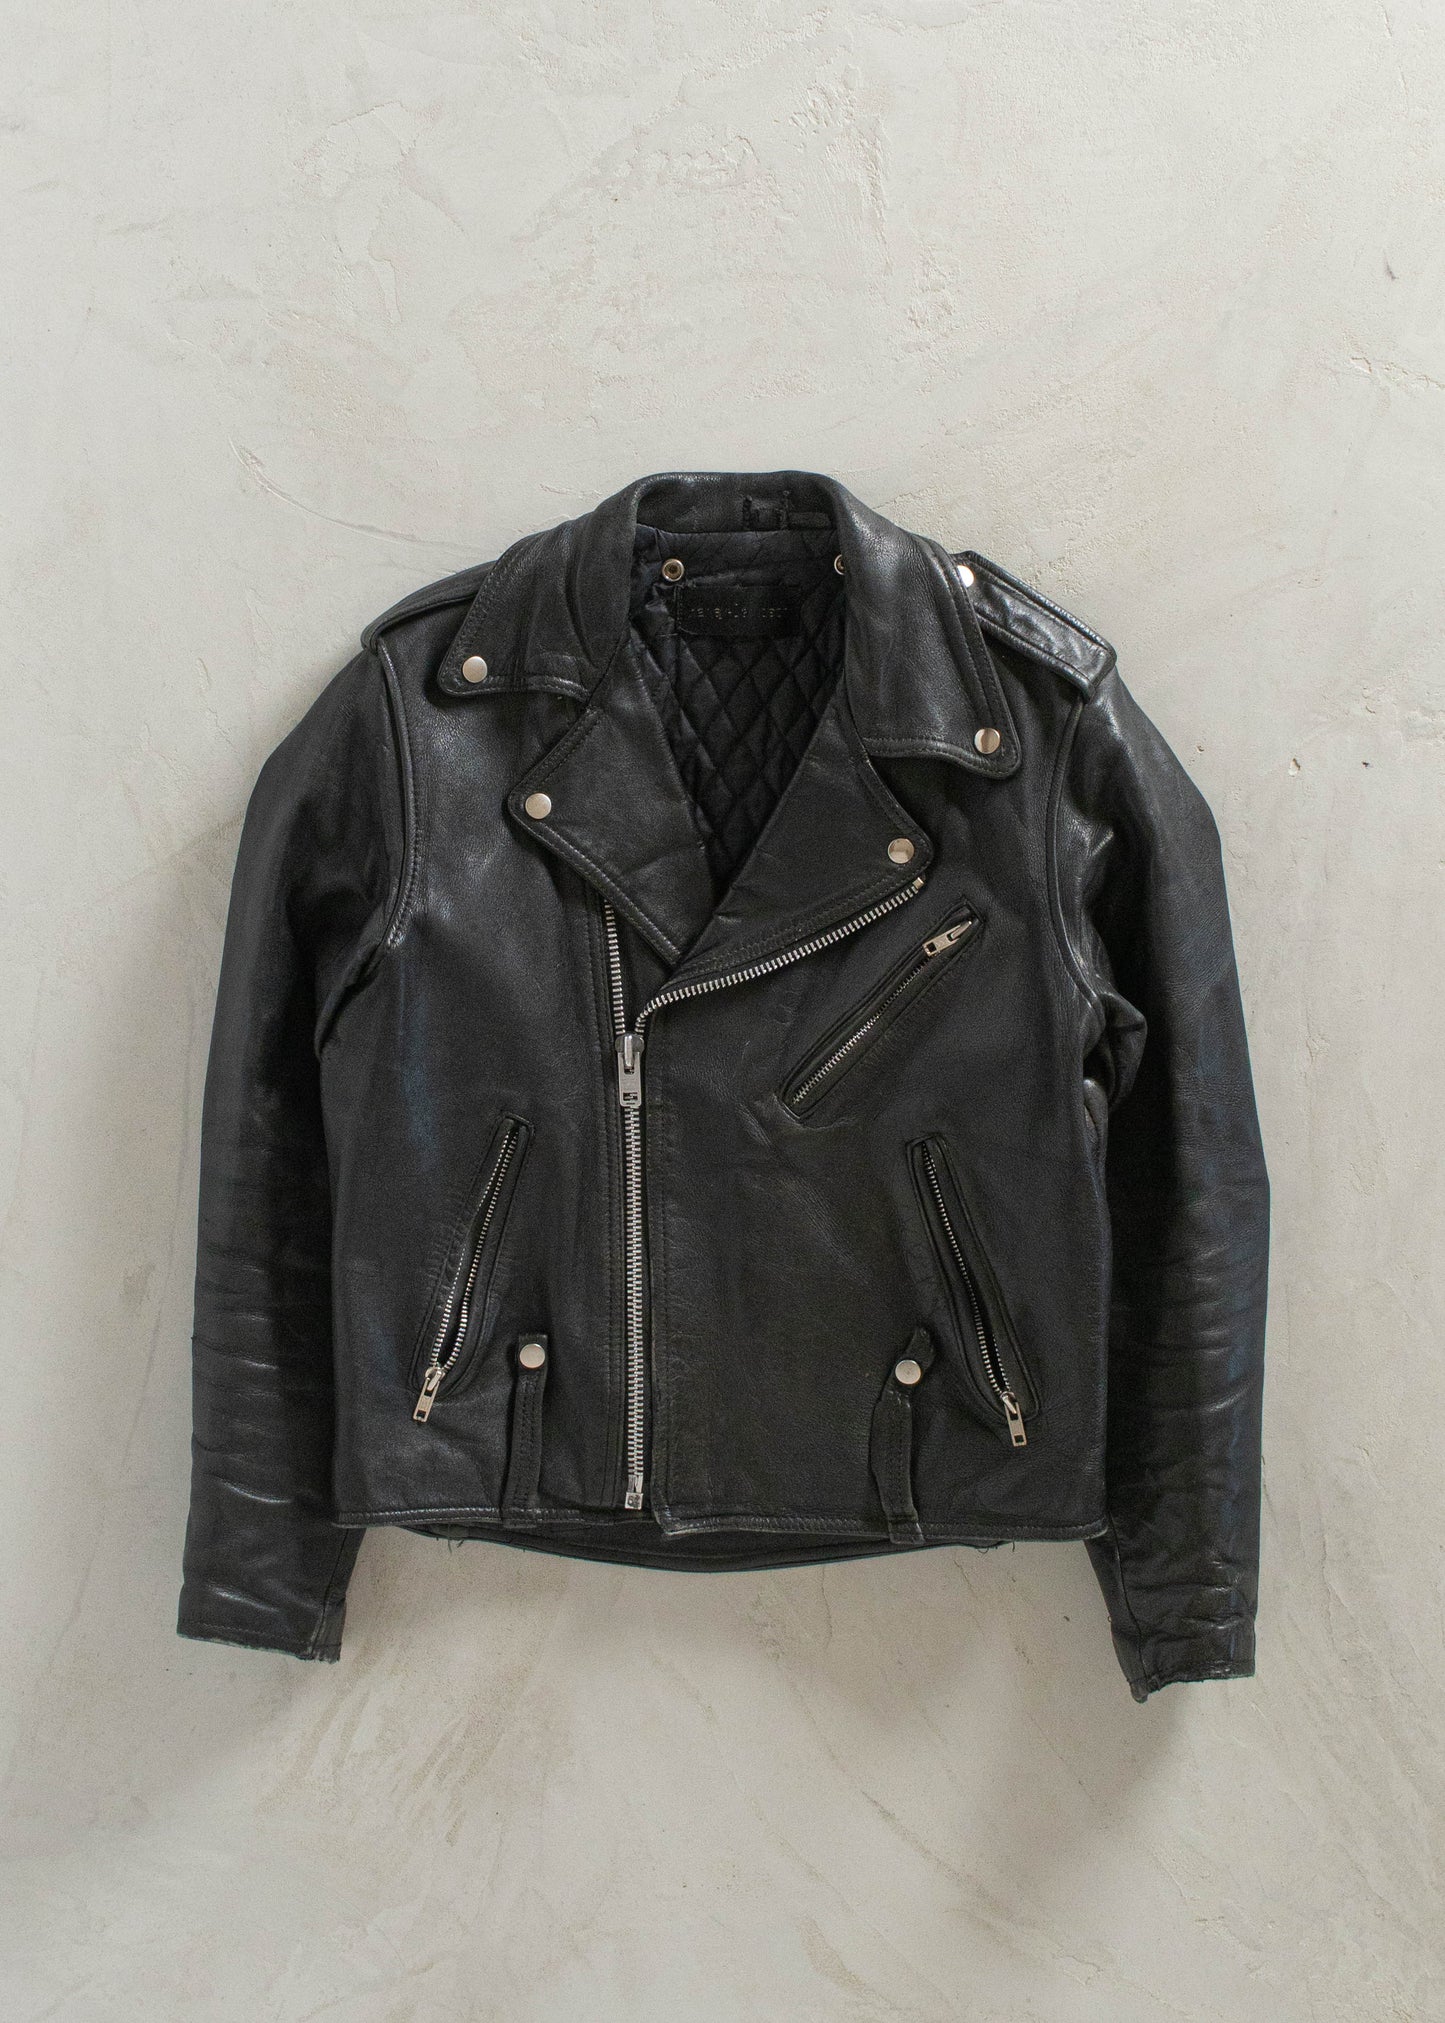 1980s Leather Moto Perfecto Jacket Size S/M